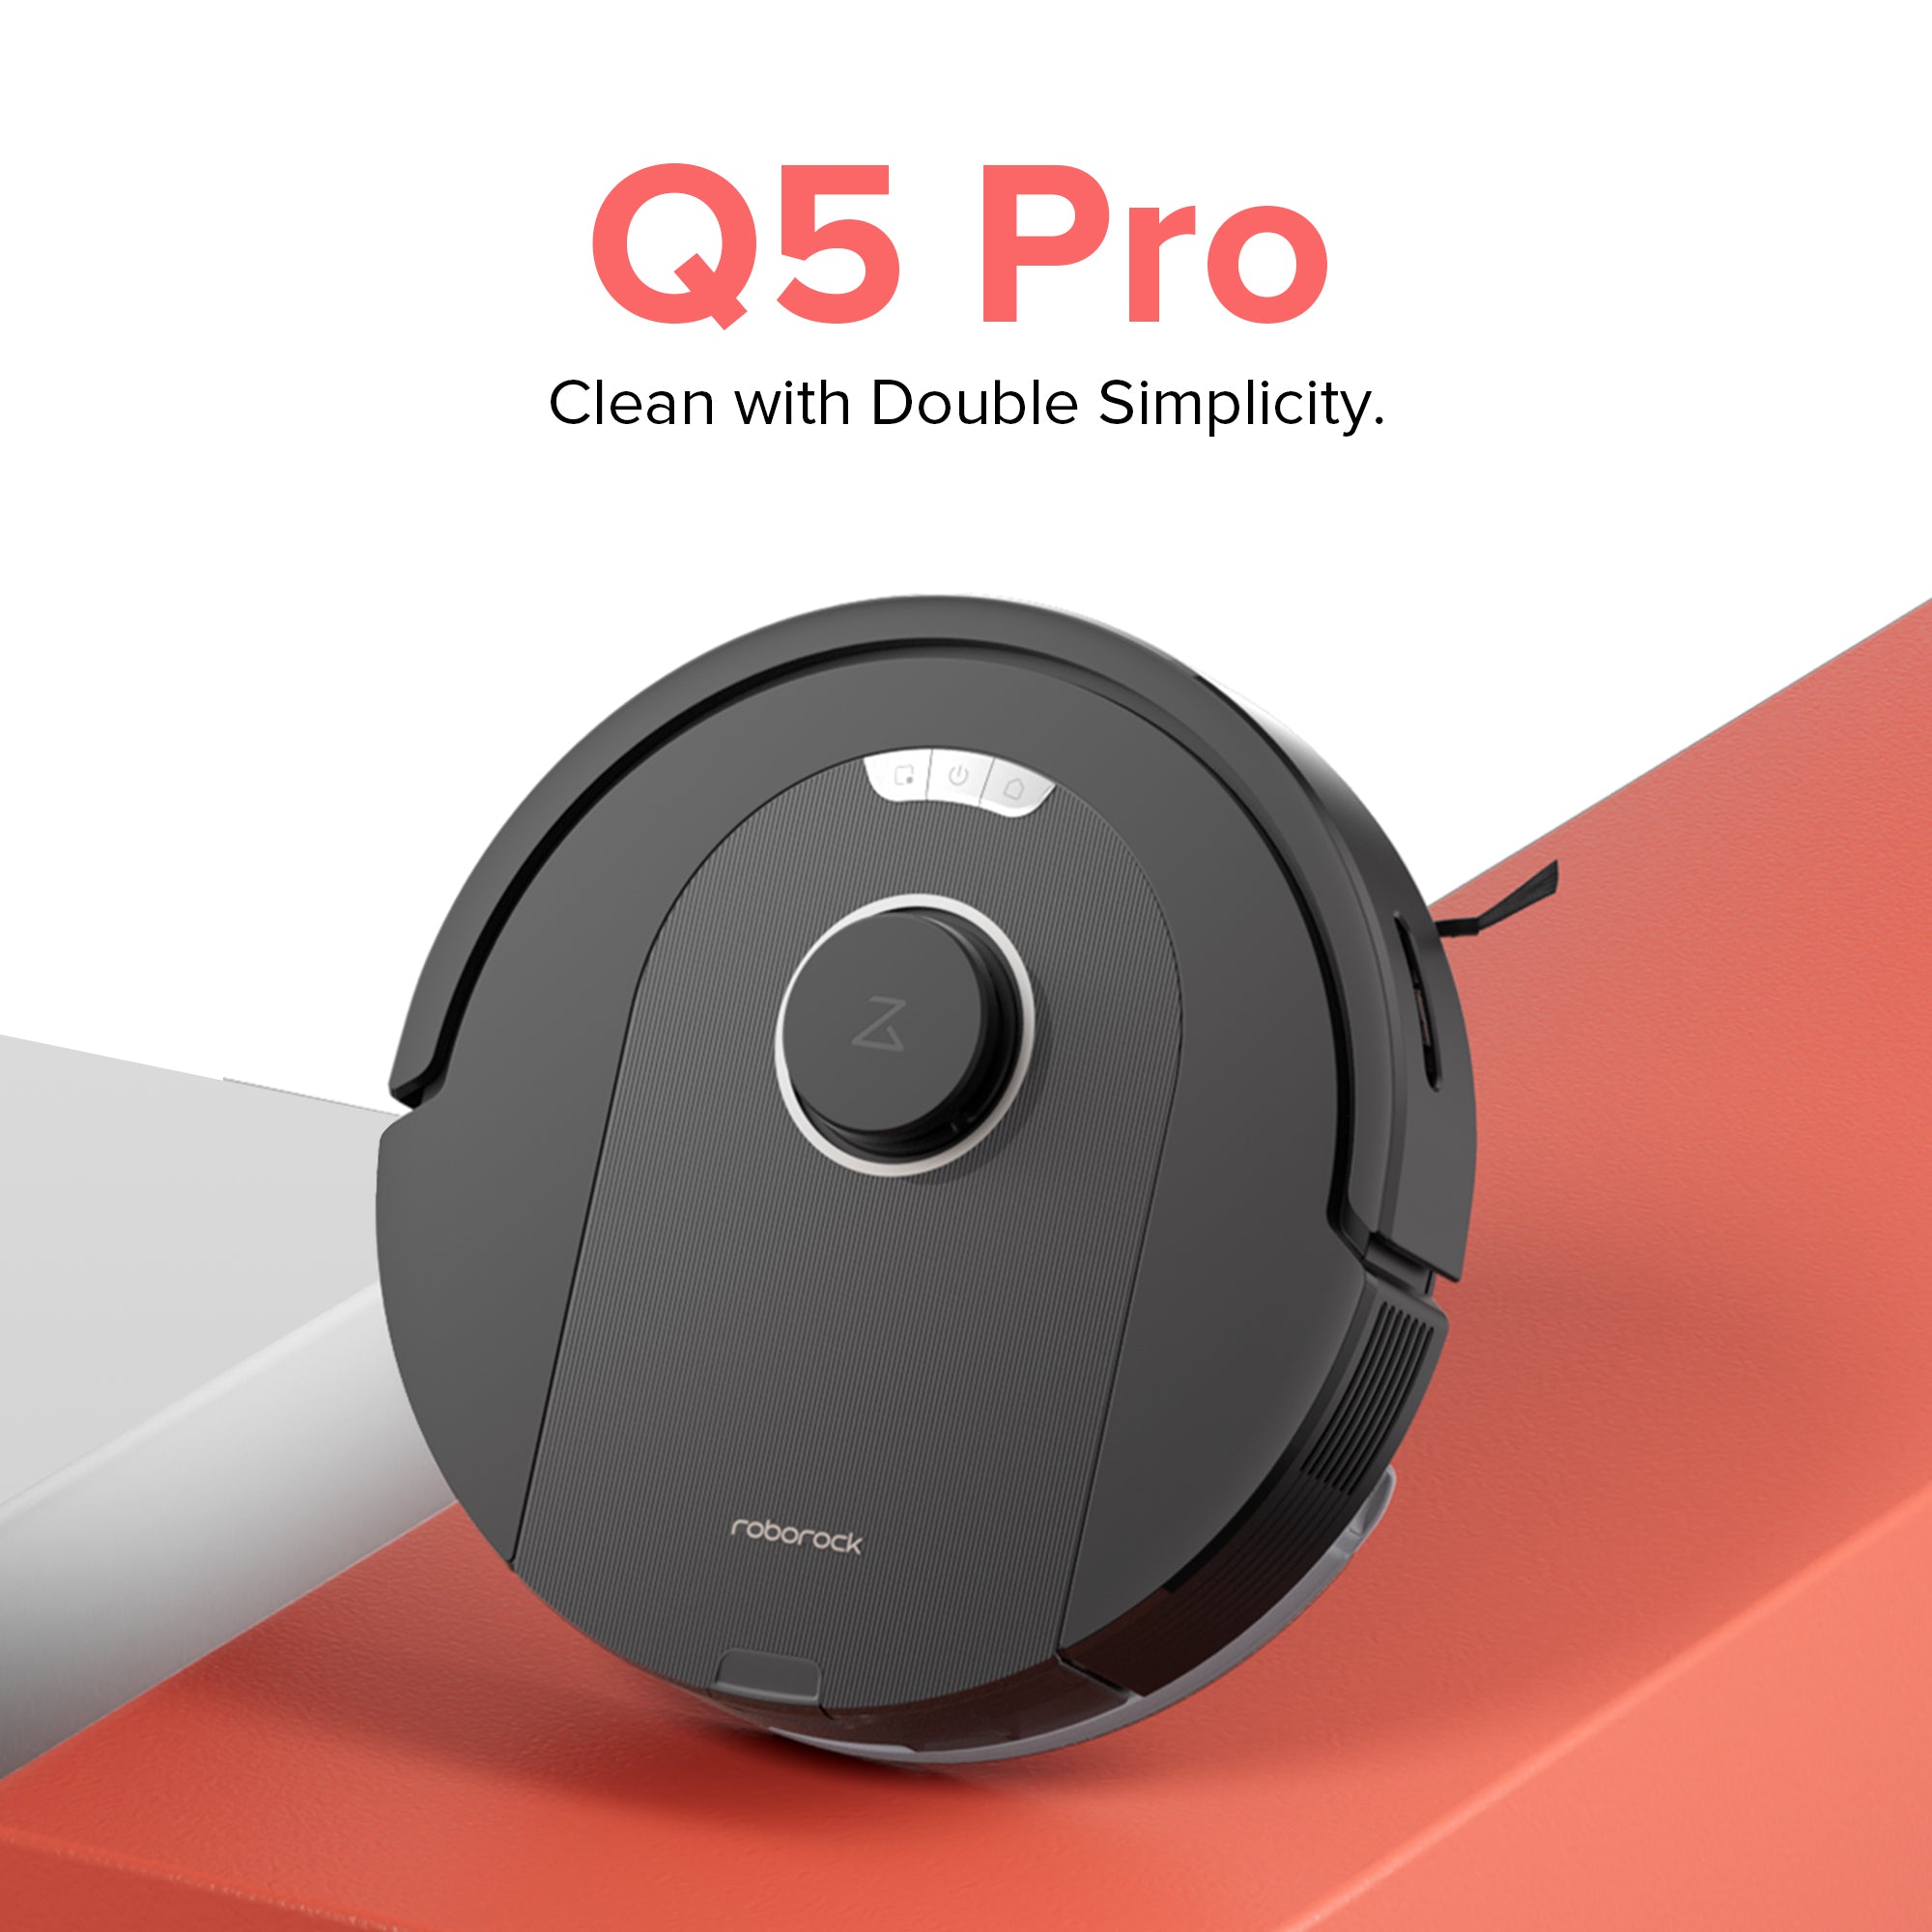 Roborock Q5 Pro vs Yeedi Vac Station: What is the difference?